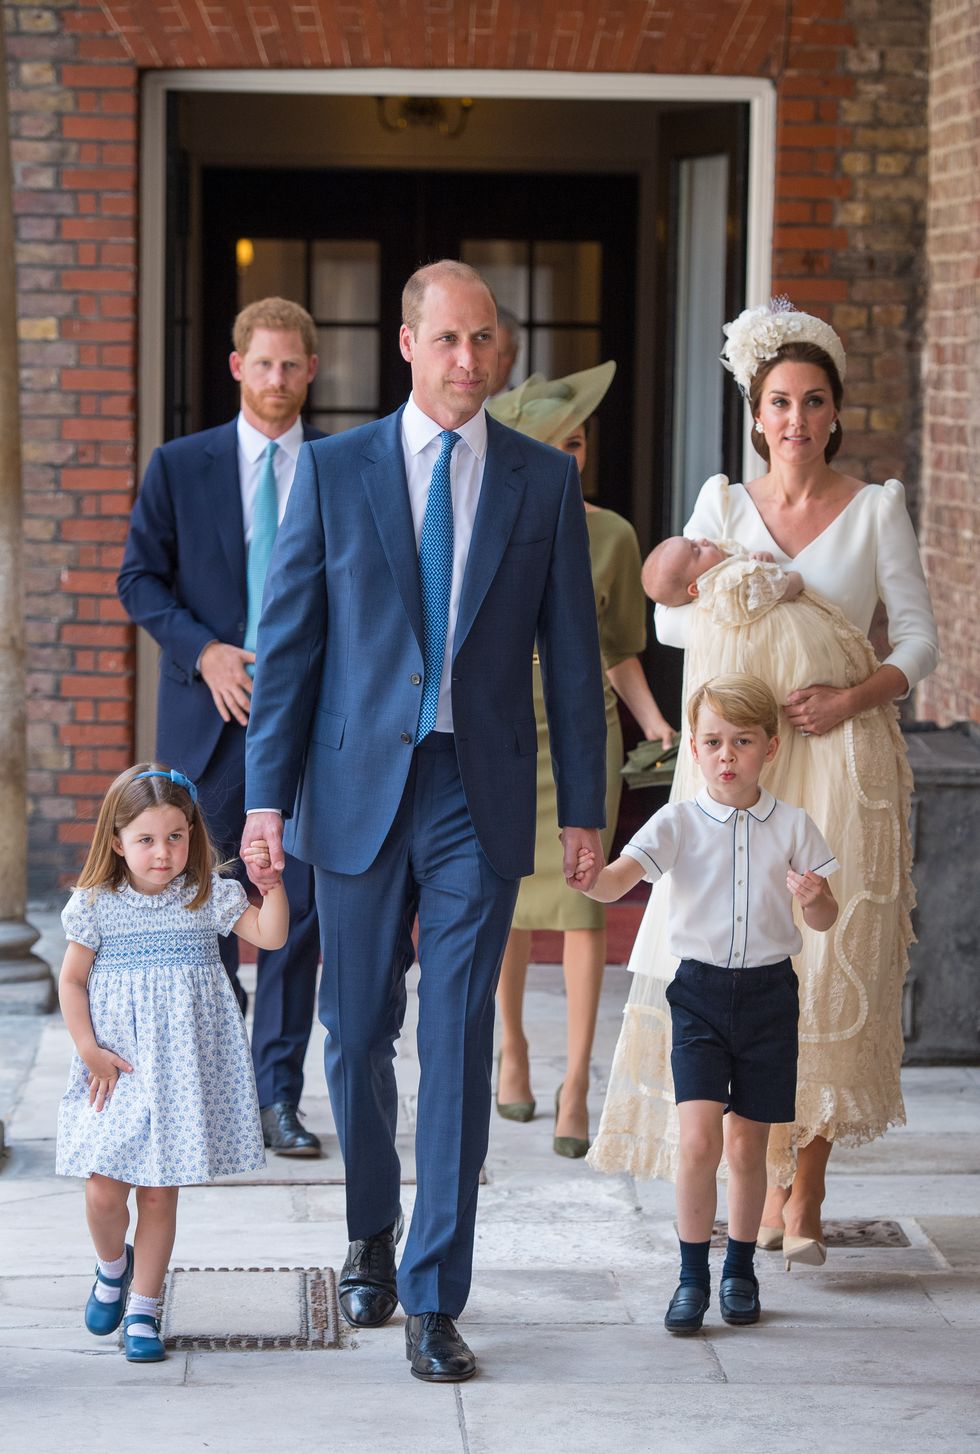 The royal family attends Prince Louis of Cambridge's christening